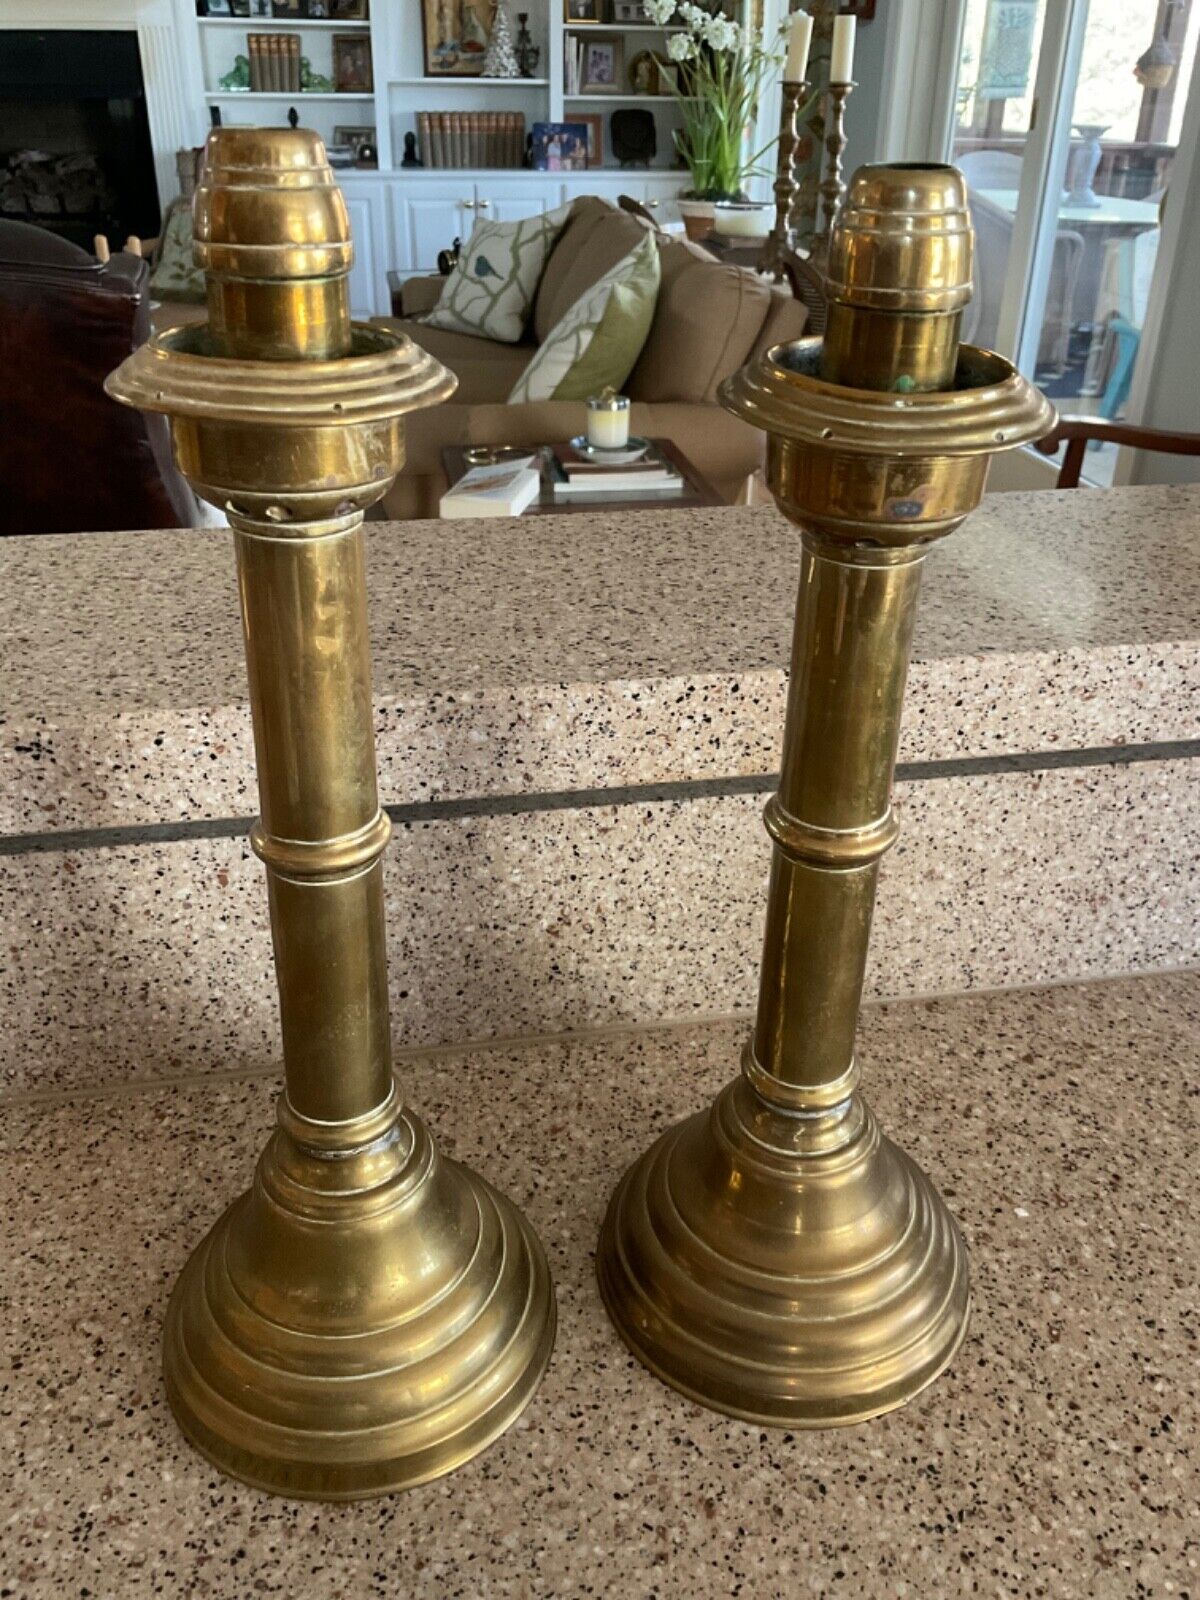 Antique  Imperial Russian Brass Candle Holders Marked on bottom in Cyrrilic